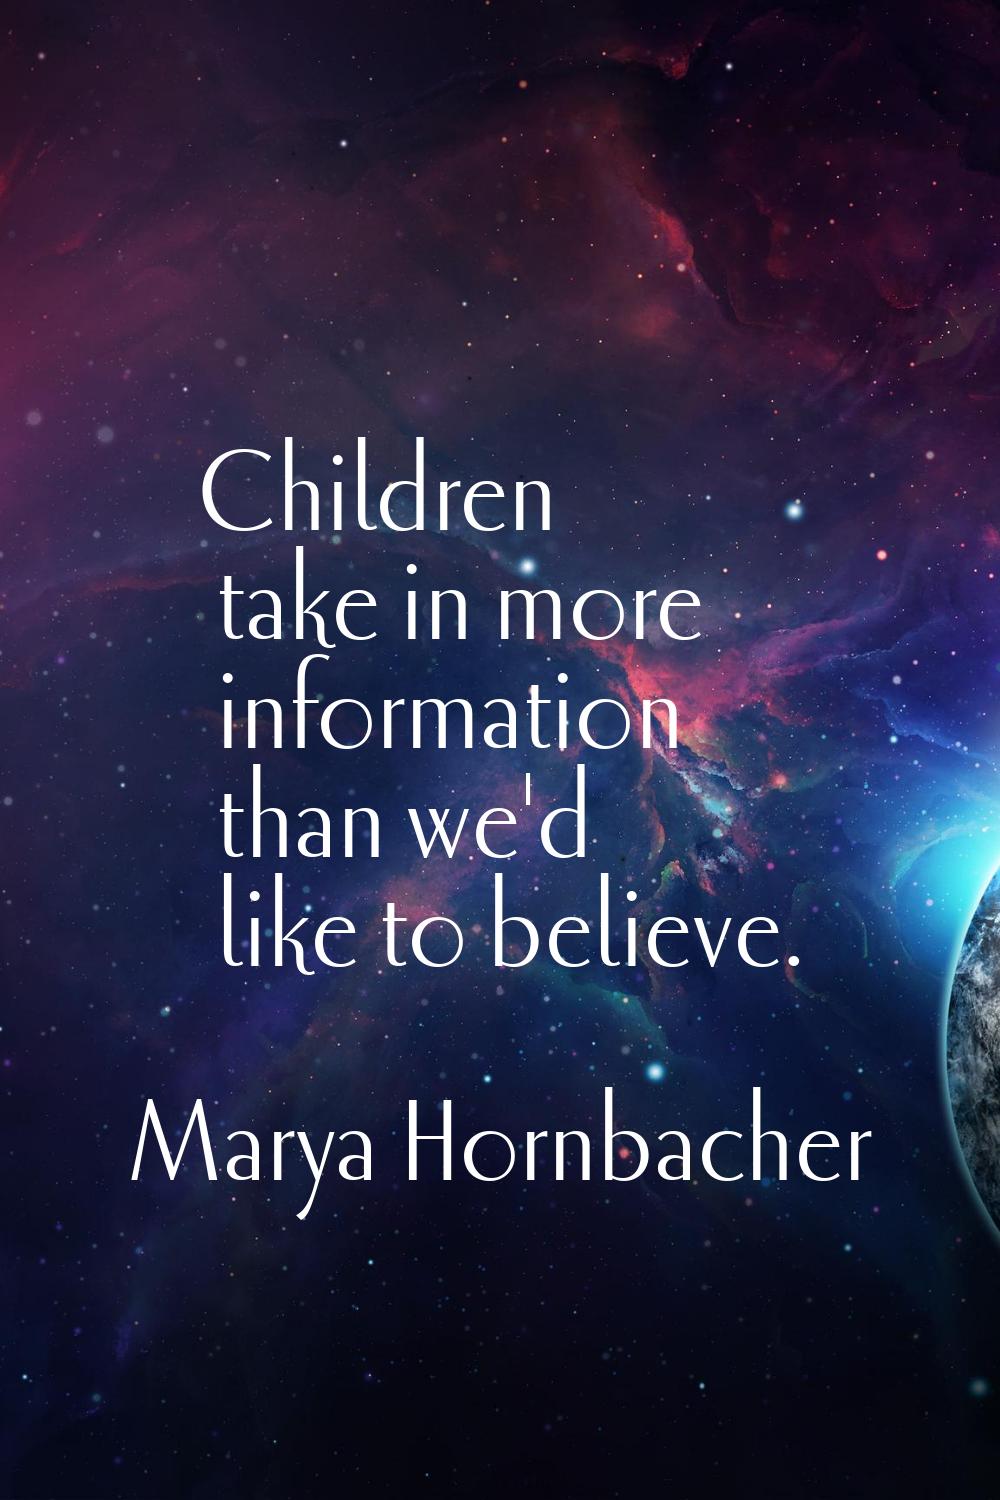 Children take in more information than we'd like to believe.